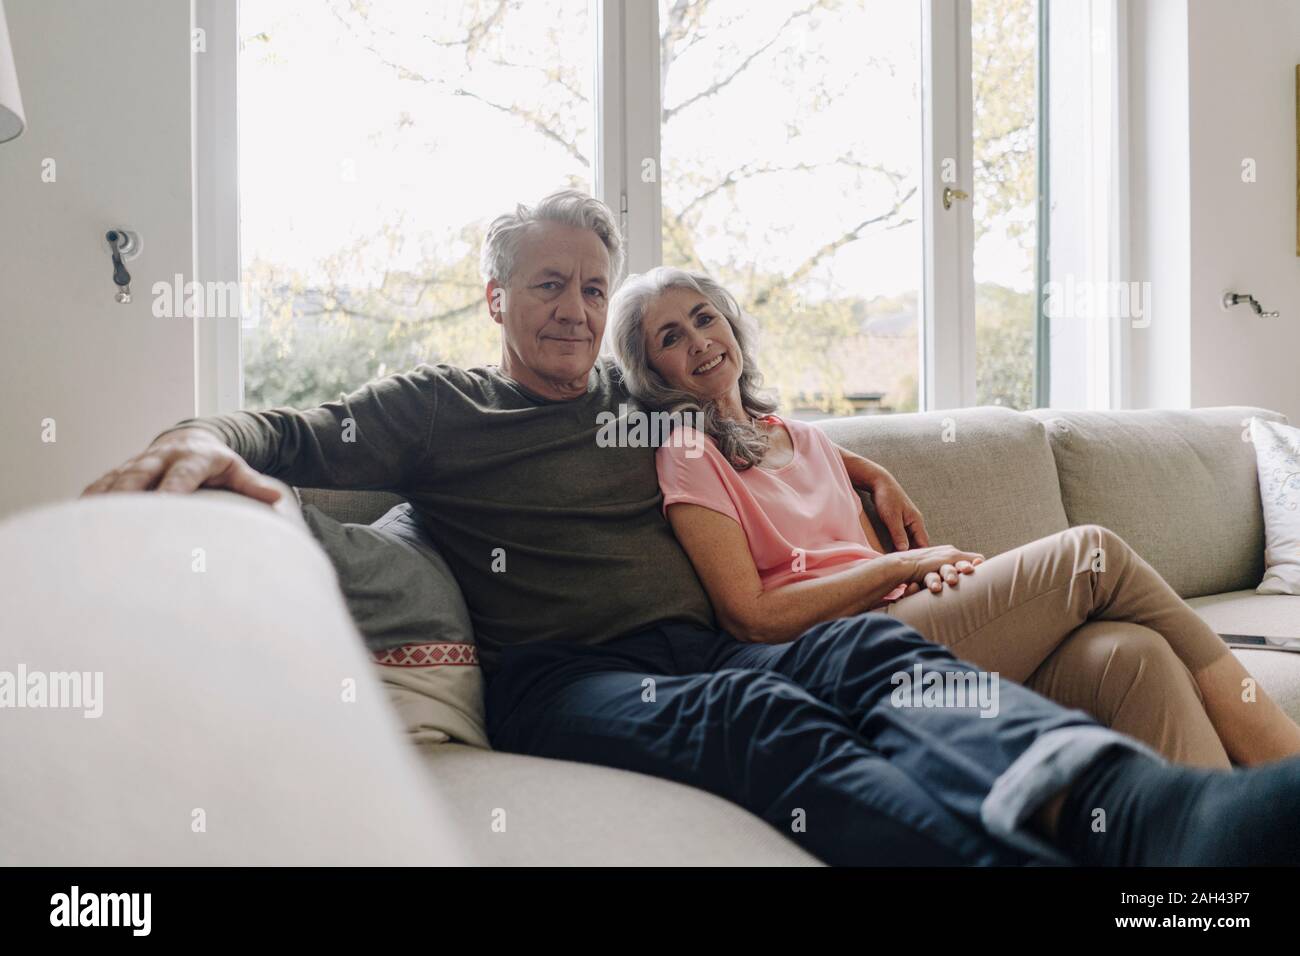 Portrait of senior couple relaxing on couch at home Stock Photo